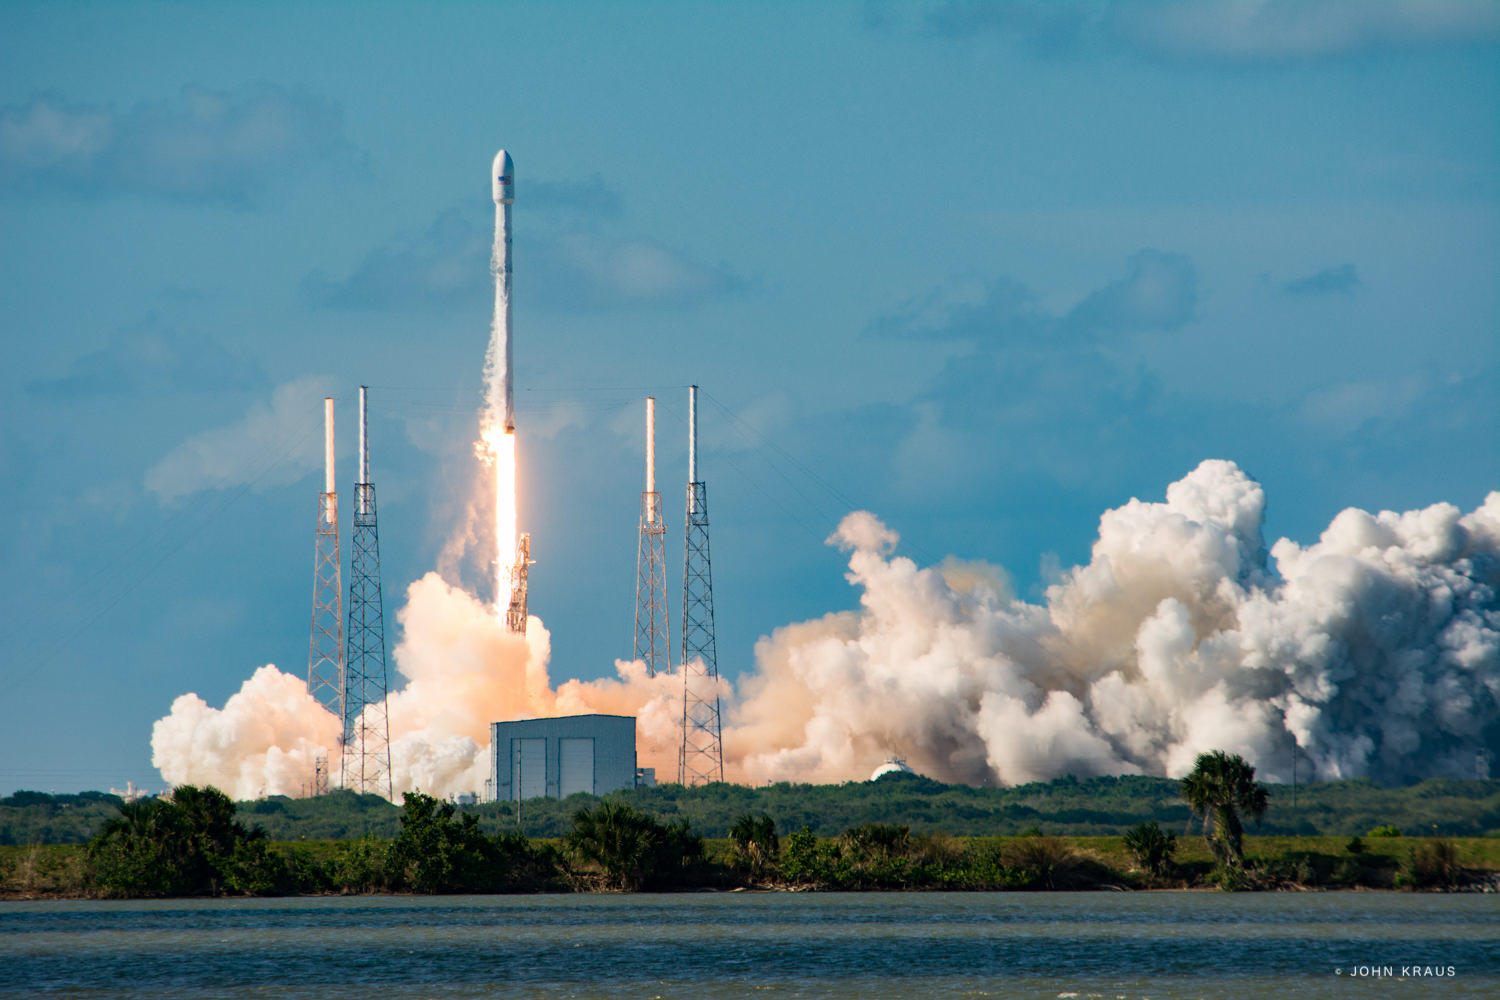 Liftoff of SpaceX Falcon 9 with Thaicom-8 on May 27, 2016 from Space Launch Complex 40 at Cape Canaveral Air Force Station, Fl.  Credit: John Kraus 